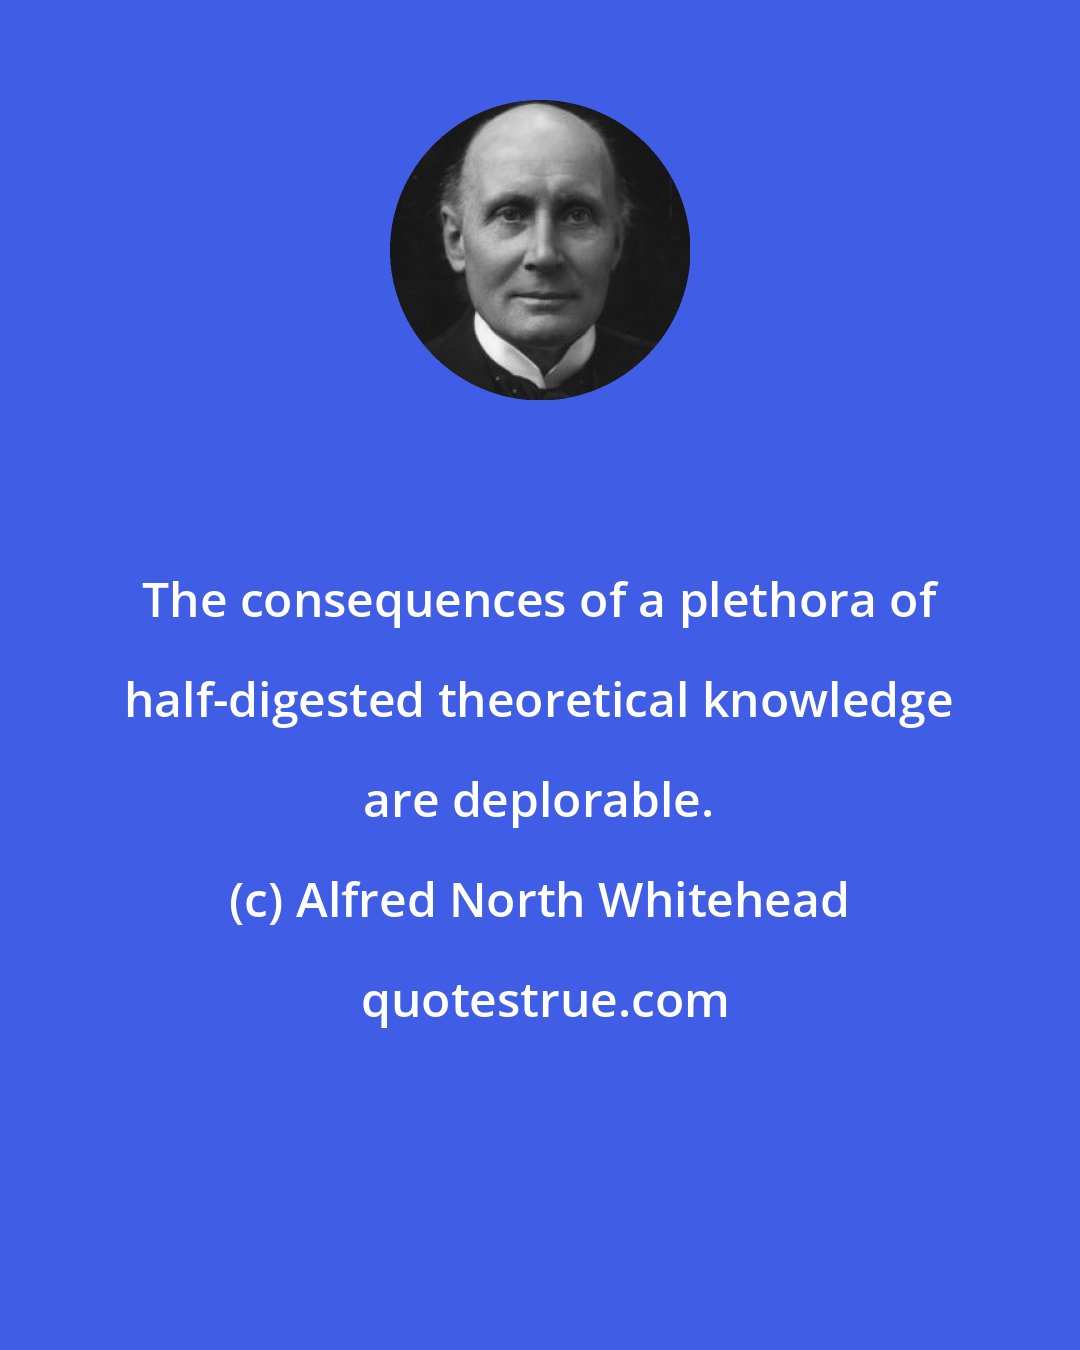 Alfred North Whitehead: The consequences of a plethora of half-digested theoretical knowledge are deplorable.